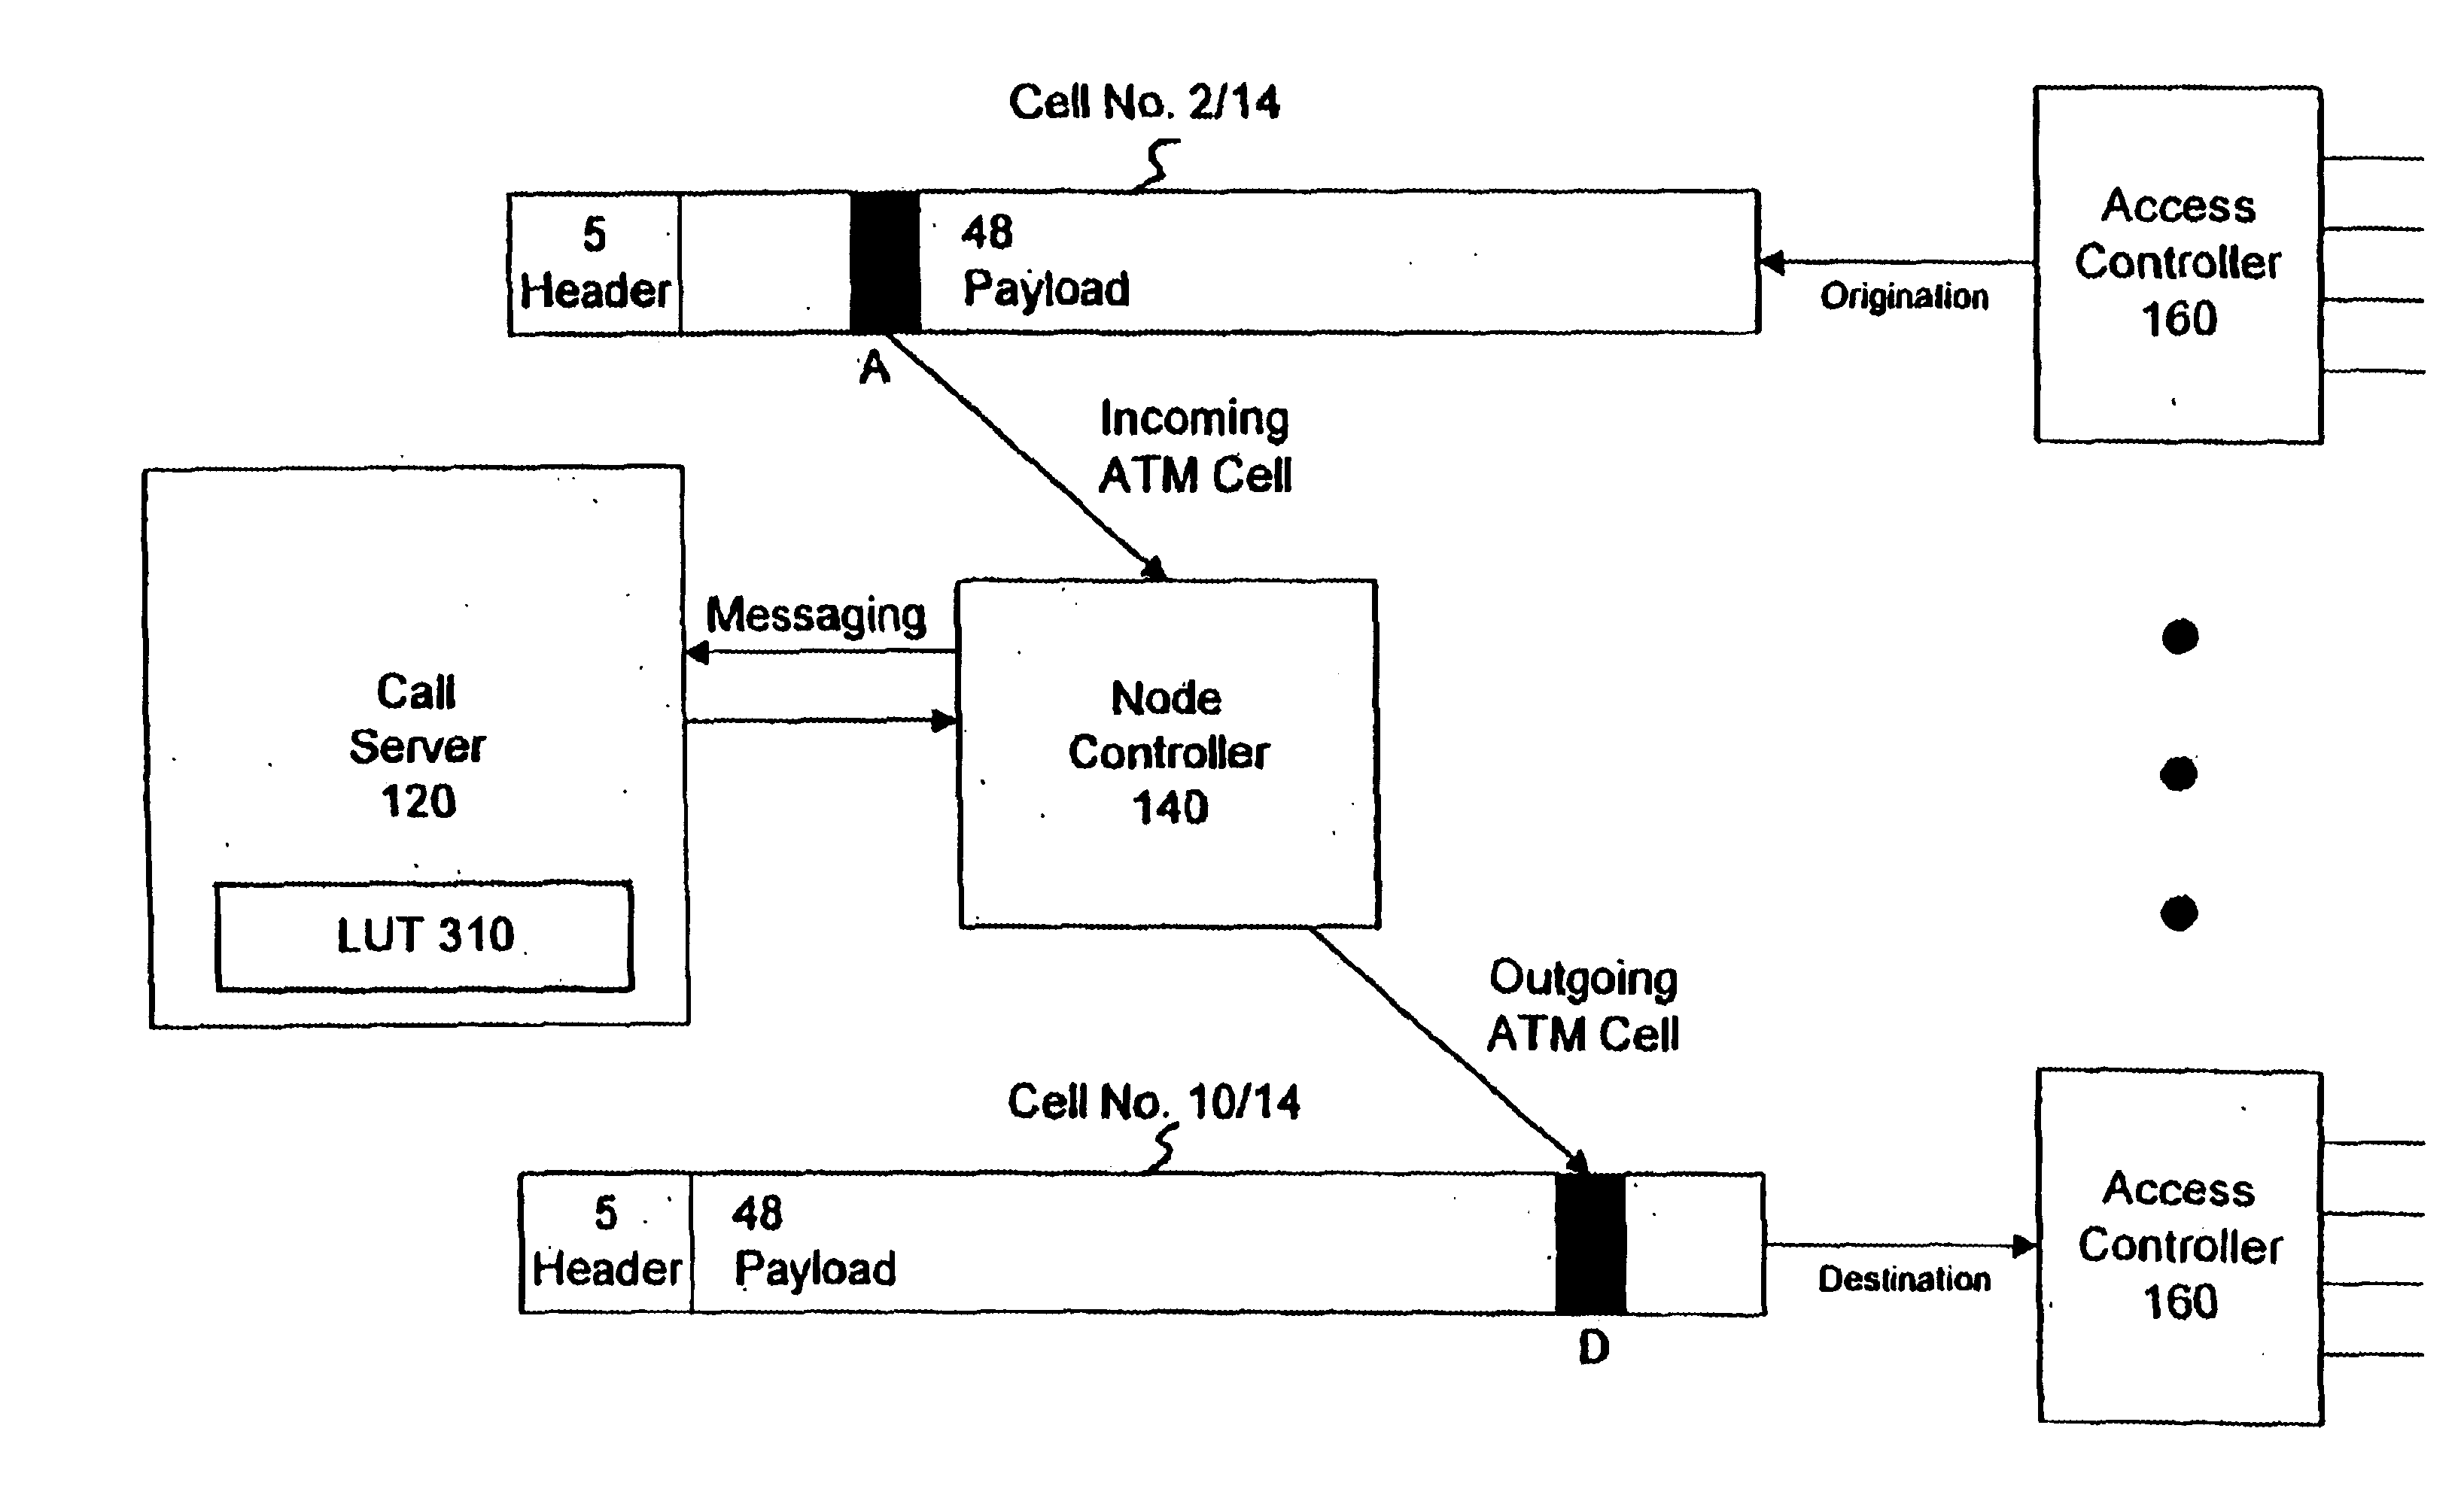 Private branch exchange built using an ATM Network